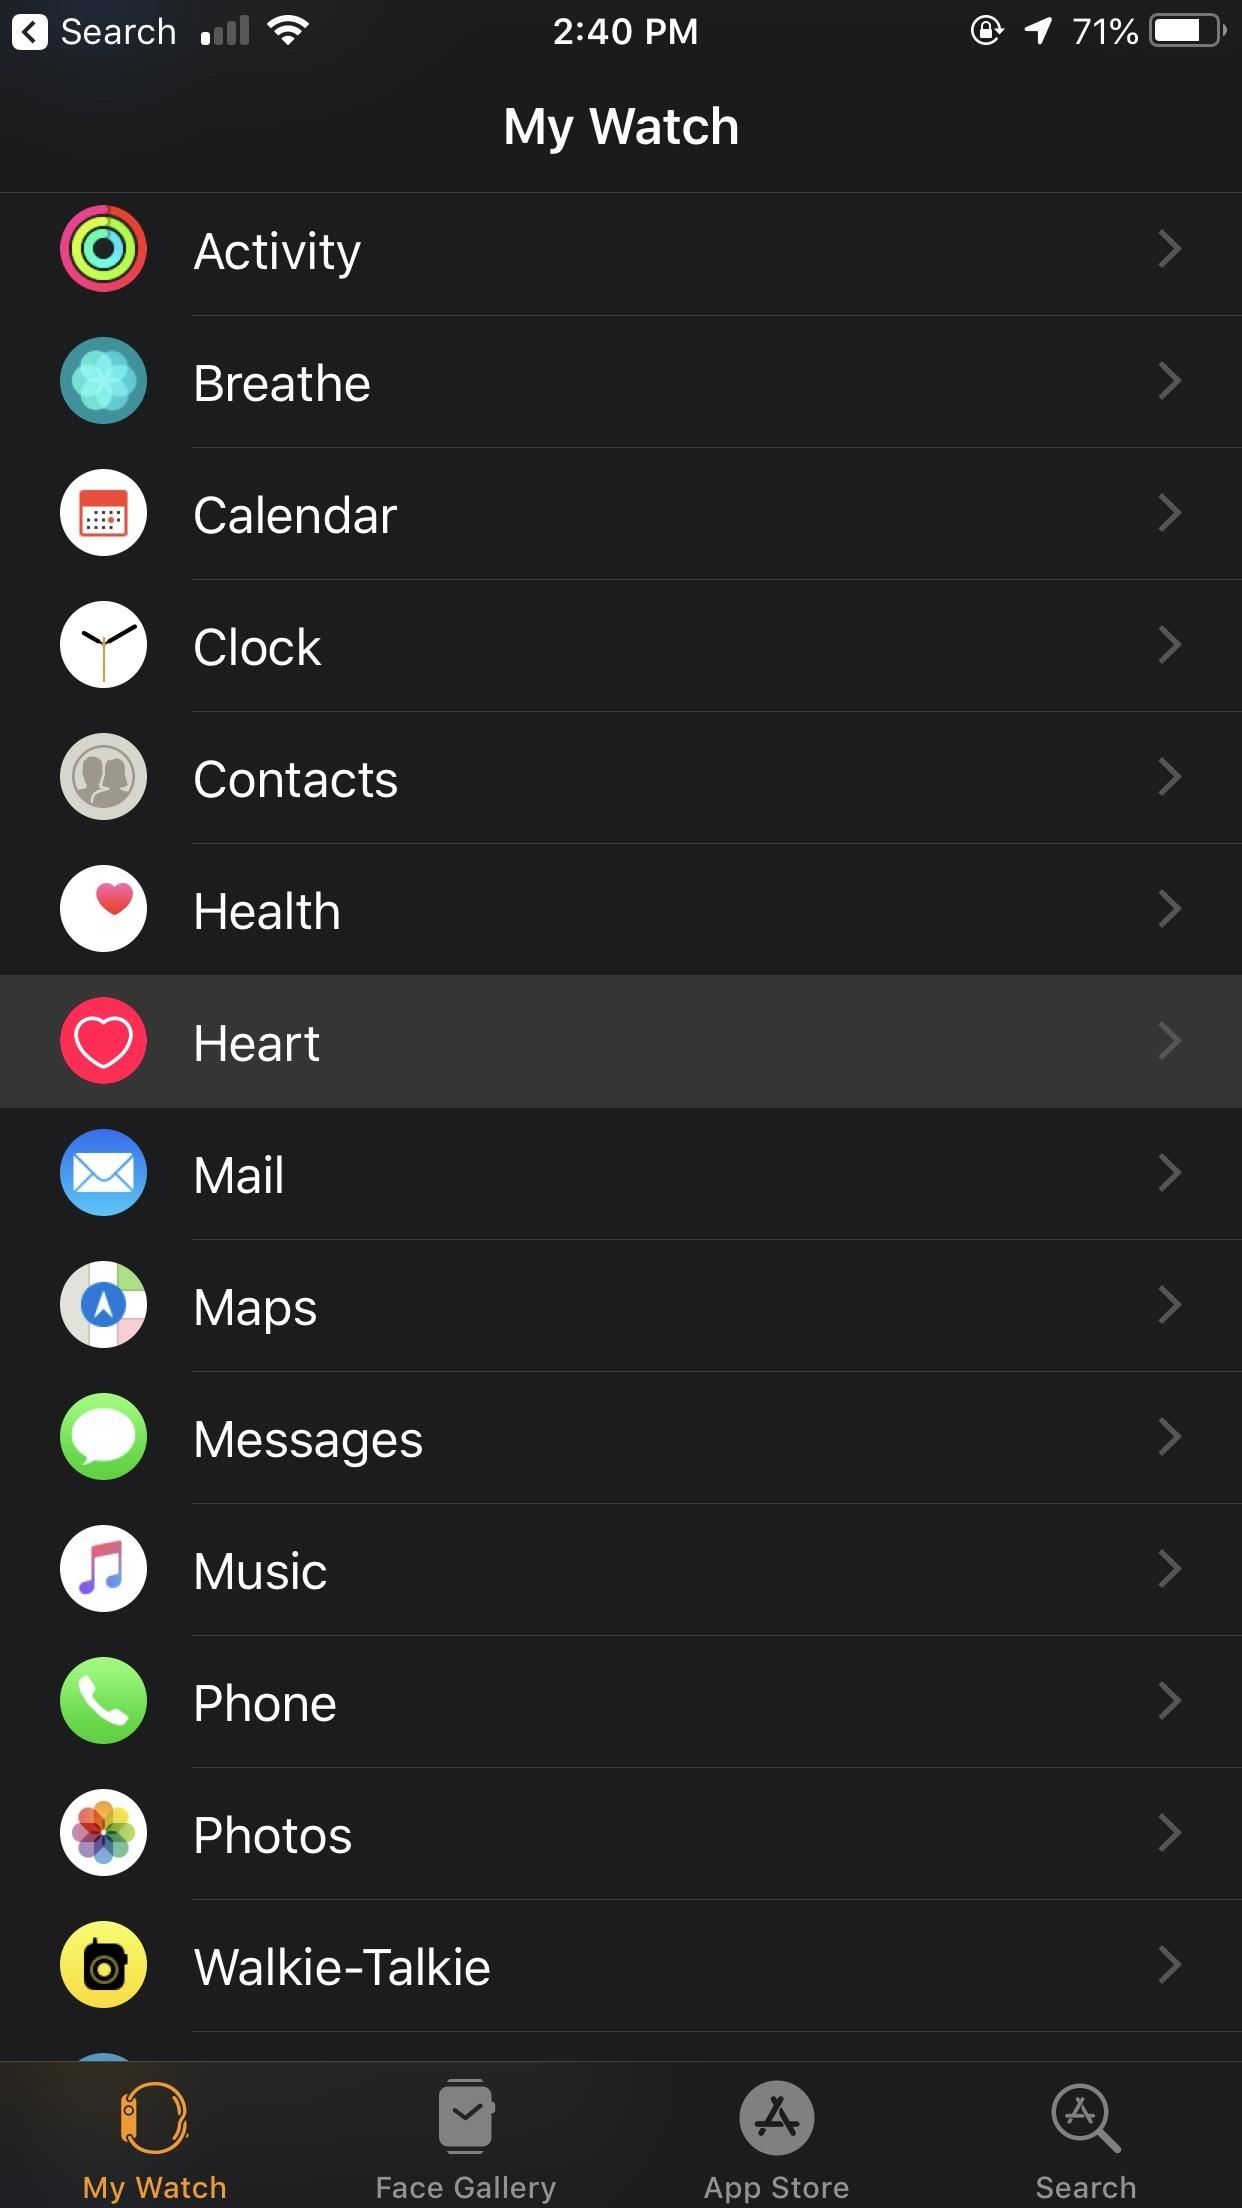 What to Do When You Get a Low Heart Rate Notification on Your Apple Watch